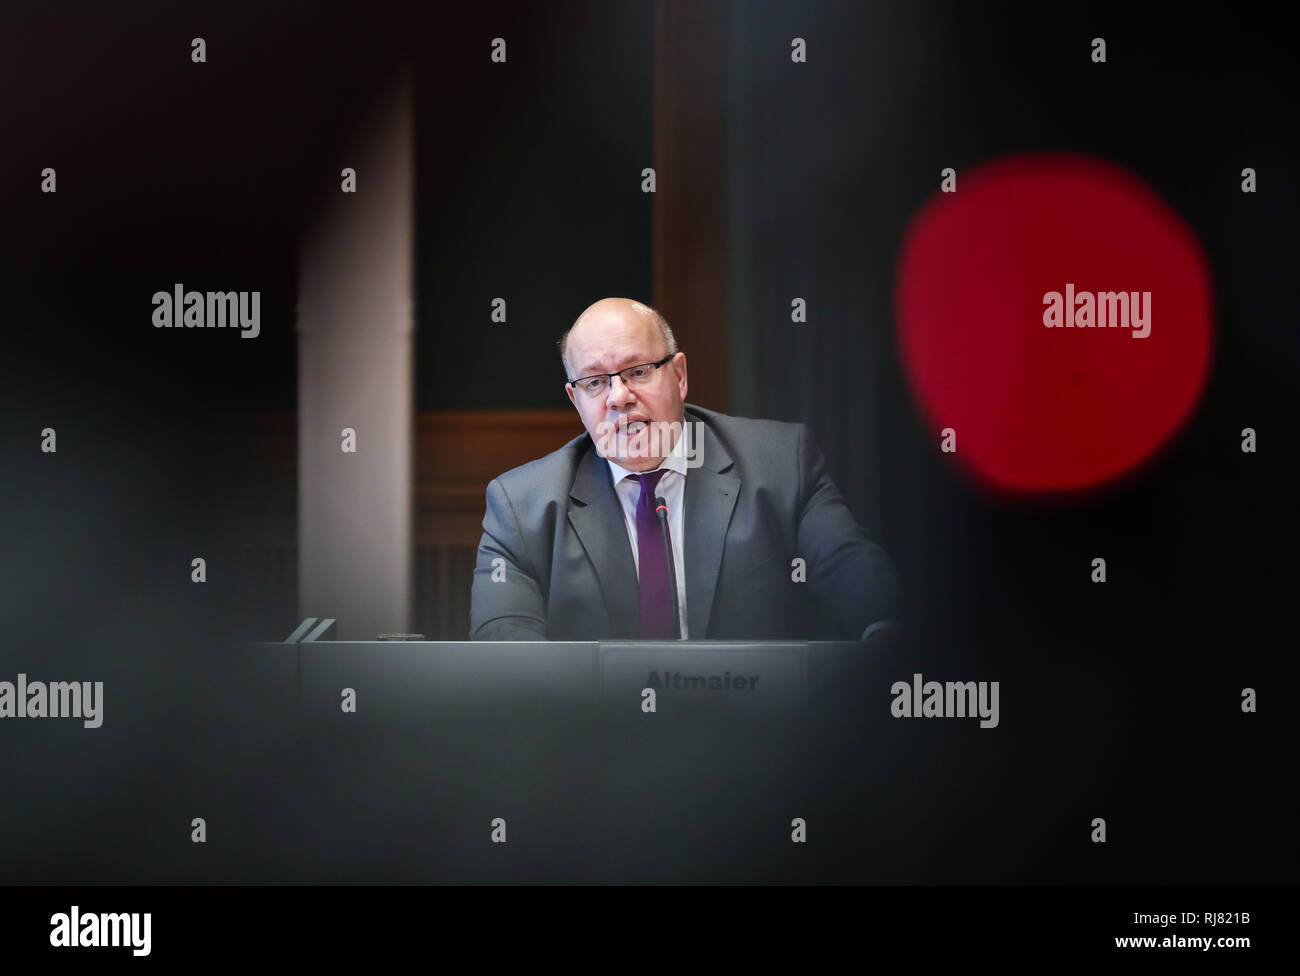 Berlin, Germany. 5th Feb, 2019. German Economy Minister Peter Altmaier speaks during a press conference to present the 'National Industry Strategy 2030' in Berlin, capital of Germany, on Feb. 5, 2019. Credit: Shan Yuqi/Xinhua/Alamy Live News Stock Photo